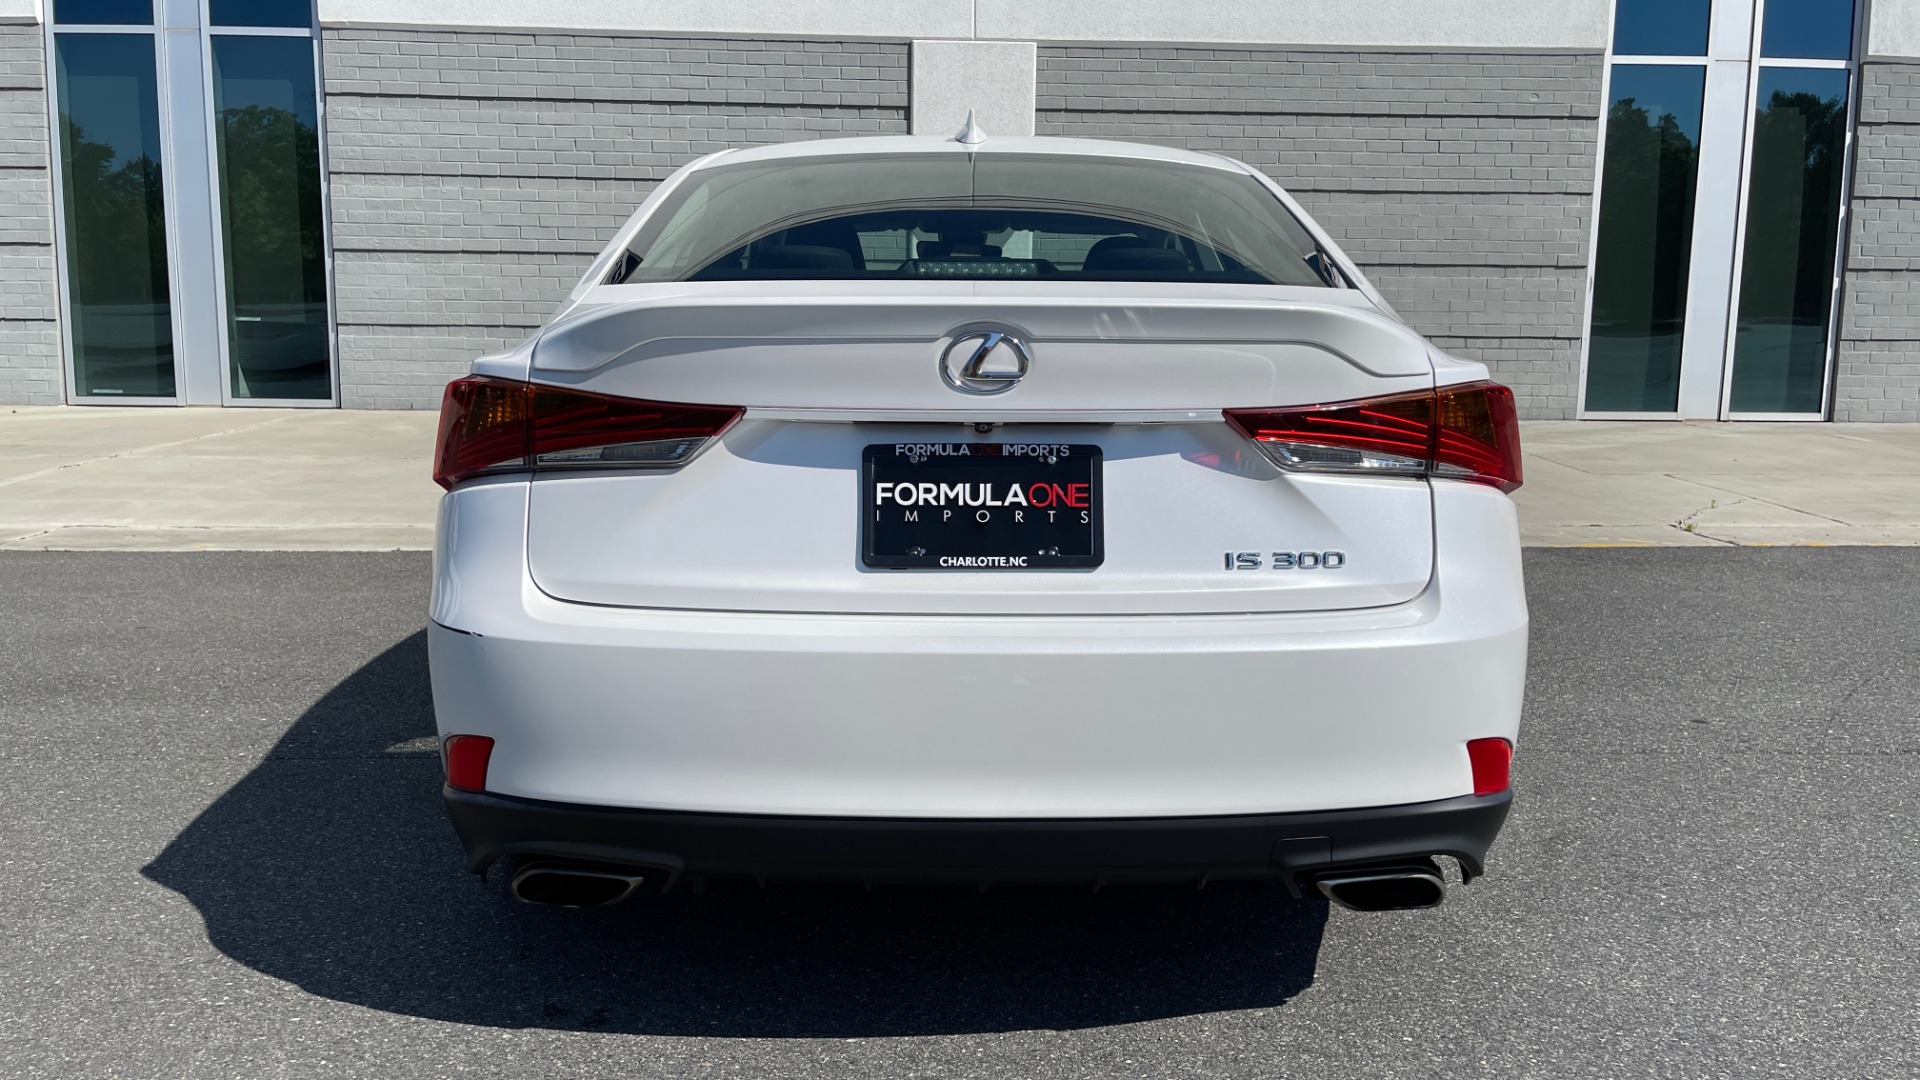 Used 2018 Lexus IS 300 / 2.0L TURBO / 8-SPD AUTO / SUNROOF / REARVIEW for sale Sold at Formula Imports in Charlotte NC 28227 20